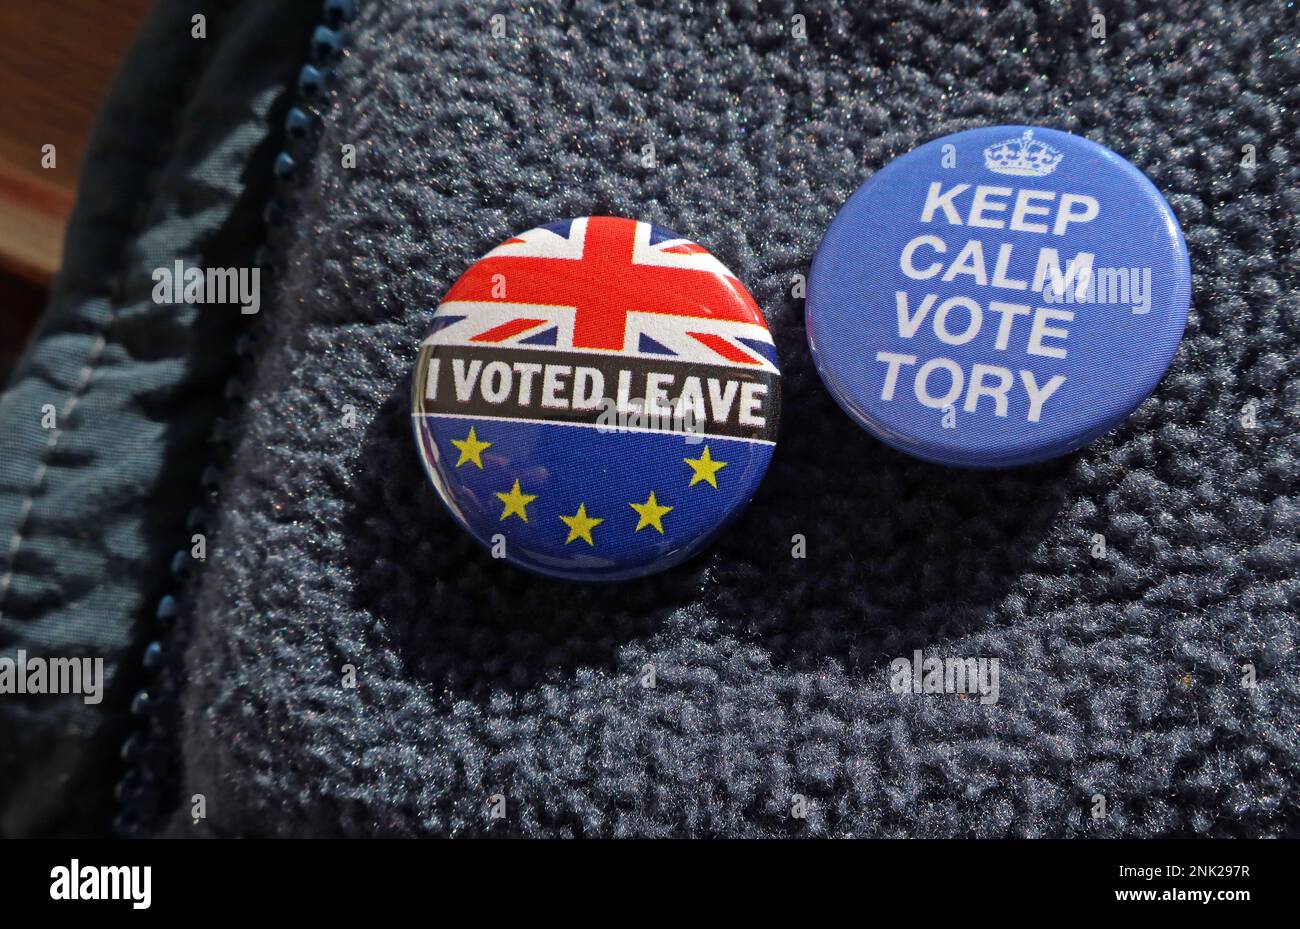 I voted Leave & Keep Calm Vote Tory Badges on a Tory voter jacket Stock Photo